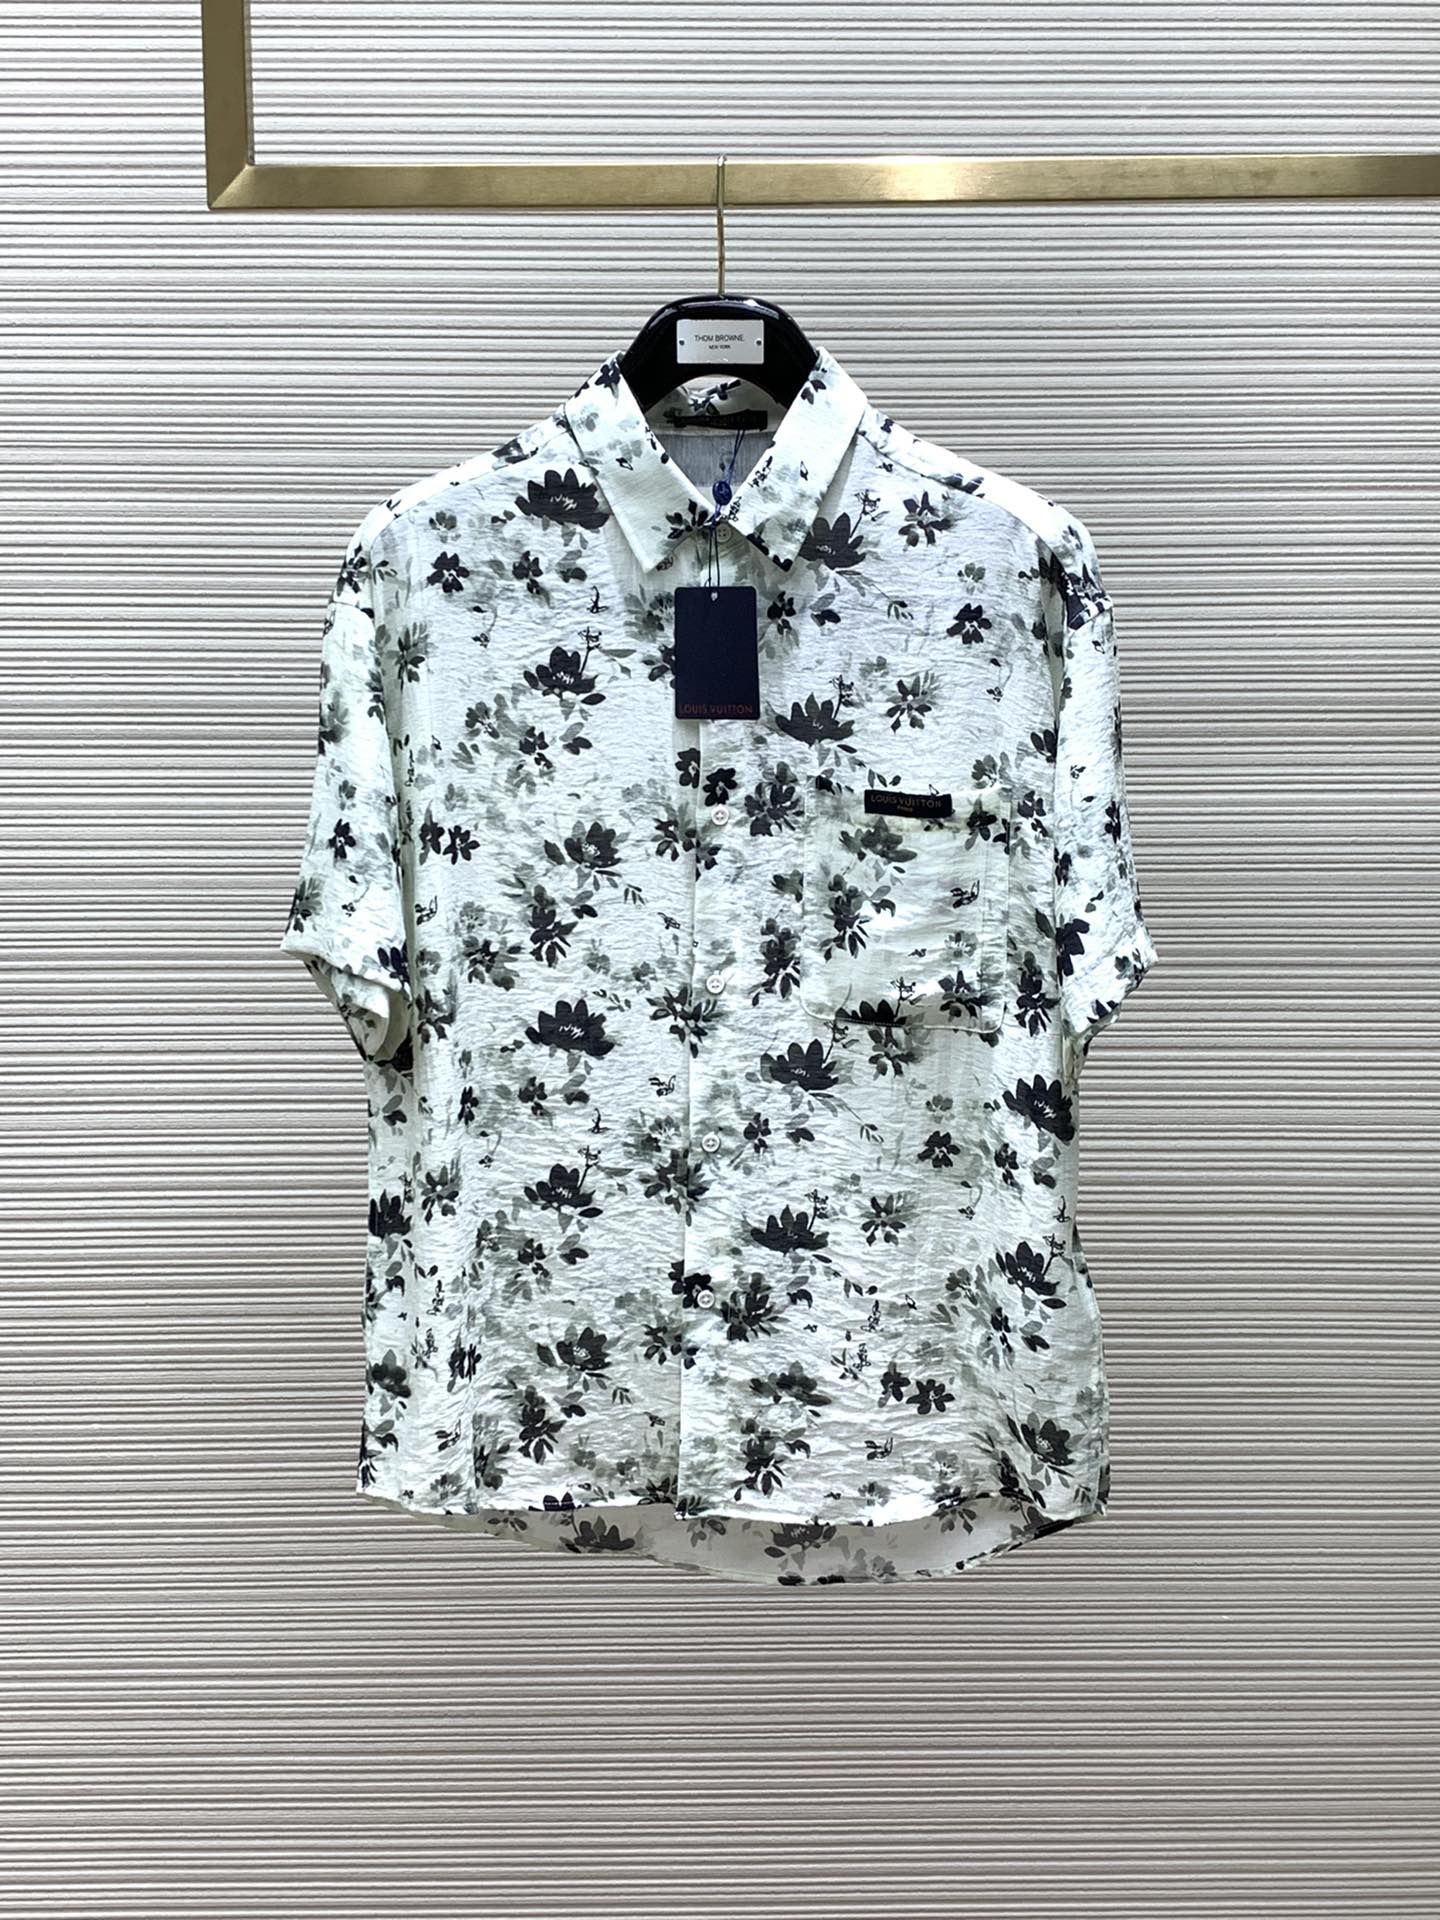 Louis Vuitton Clothing Shirts & Blouses Embroidery Summer Collection Fashion Casual